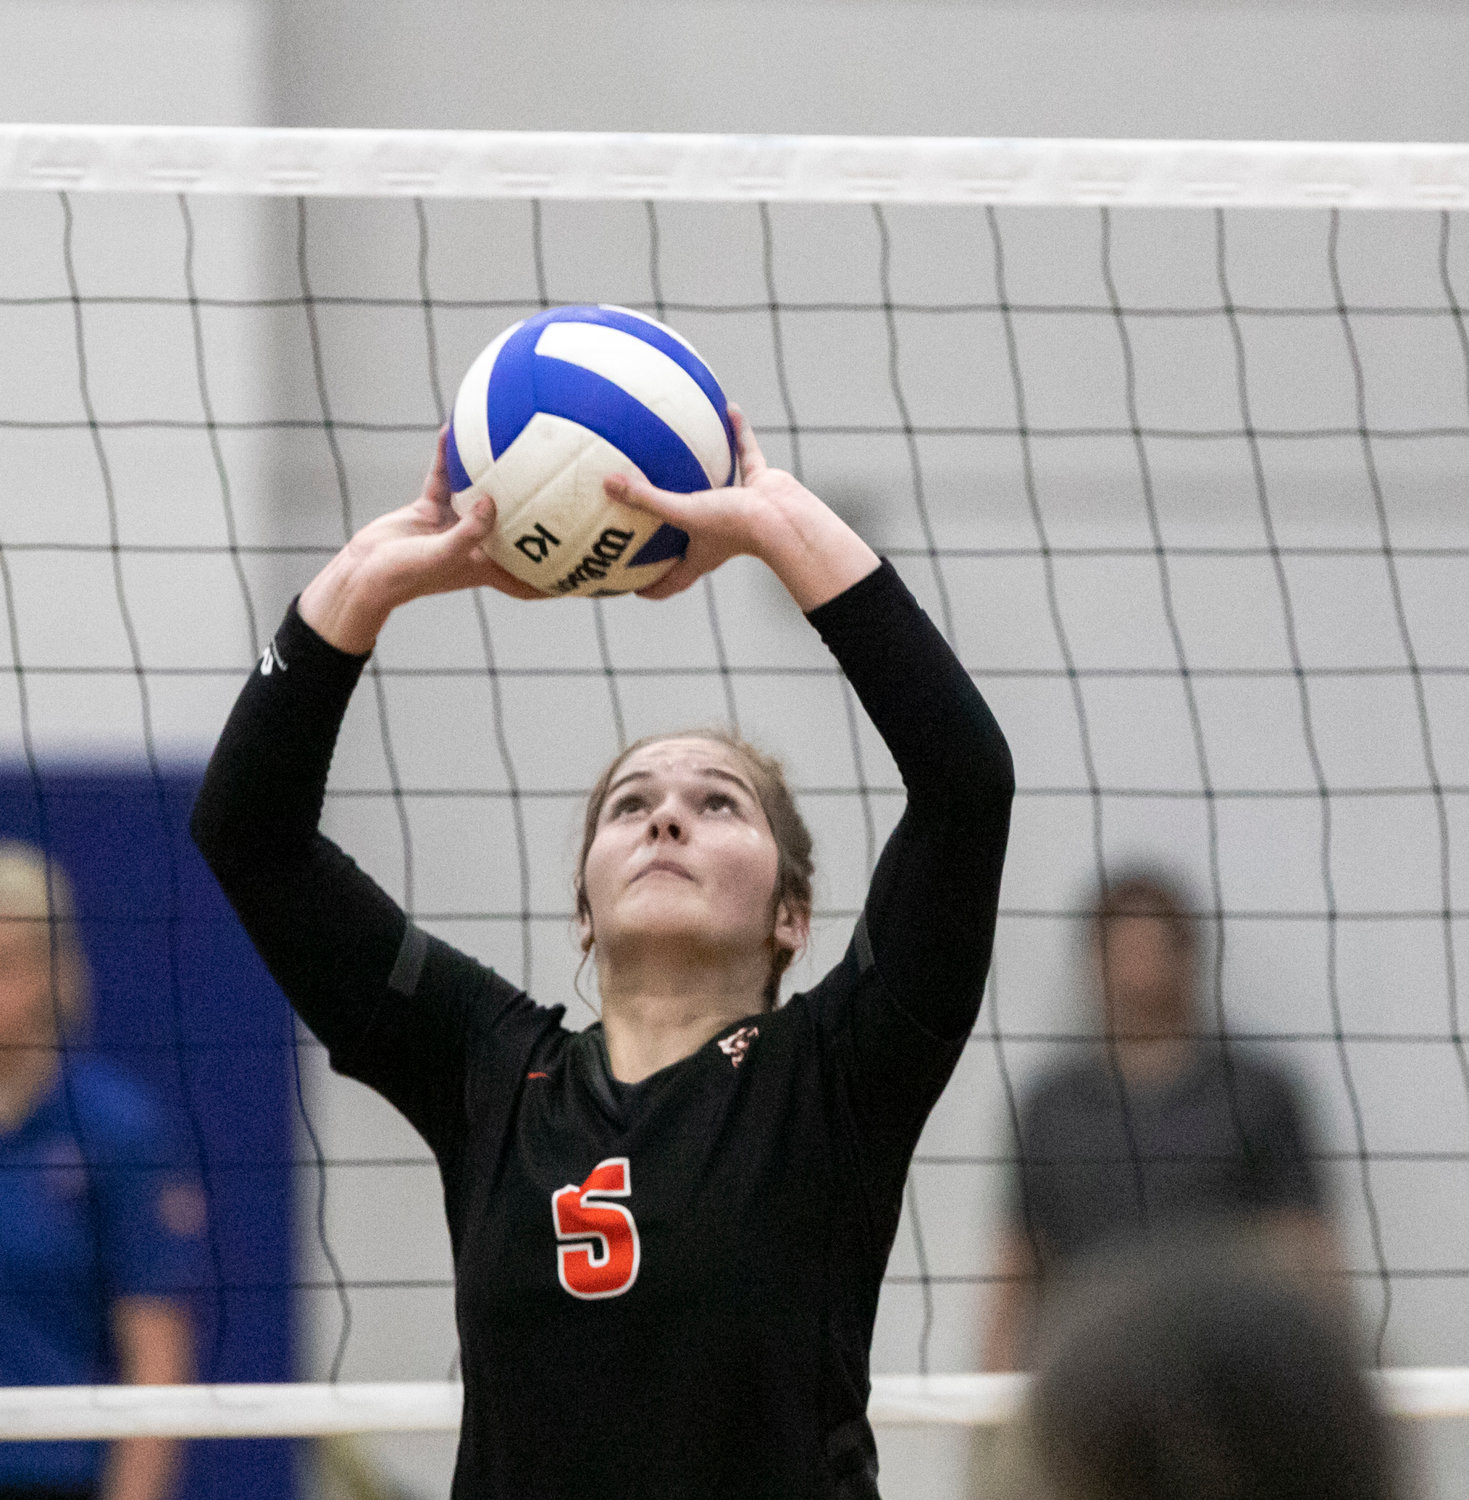 Baldwin County’s Saylor Bryant looks in a pass during the Lady Tigers’ Class 6A Area 2 tournament match against Bayside Academy Oct. 13, 2022, in Daphne. Bryant was one of two Tigers named all-county by Baldwin County Public Schools following the season.